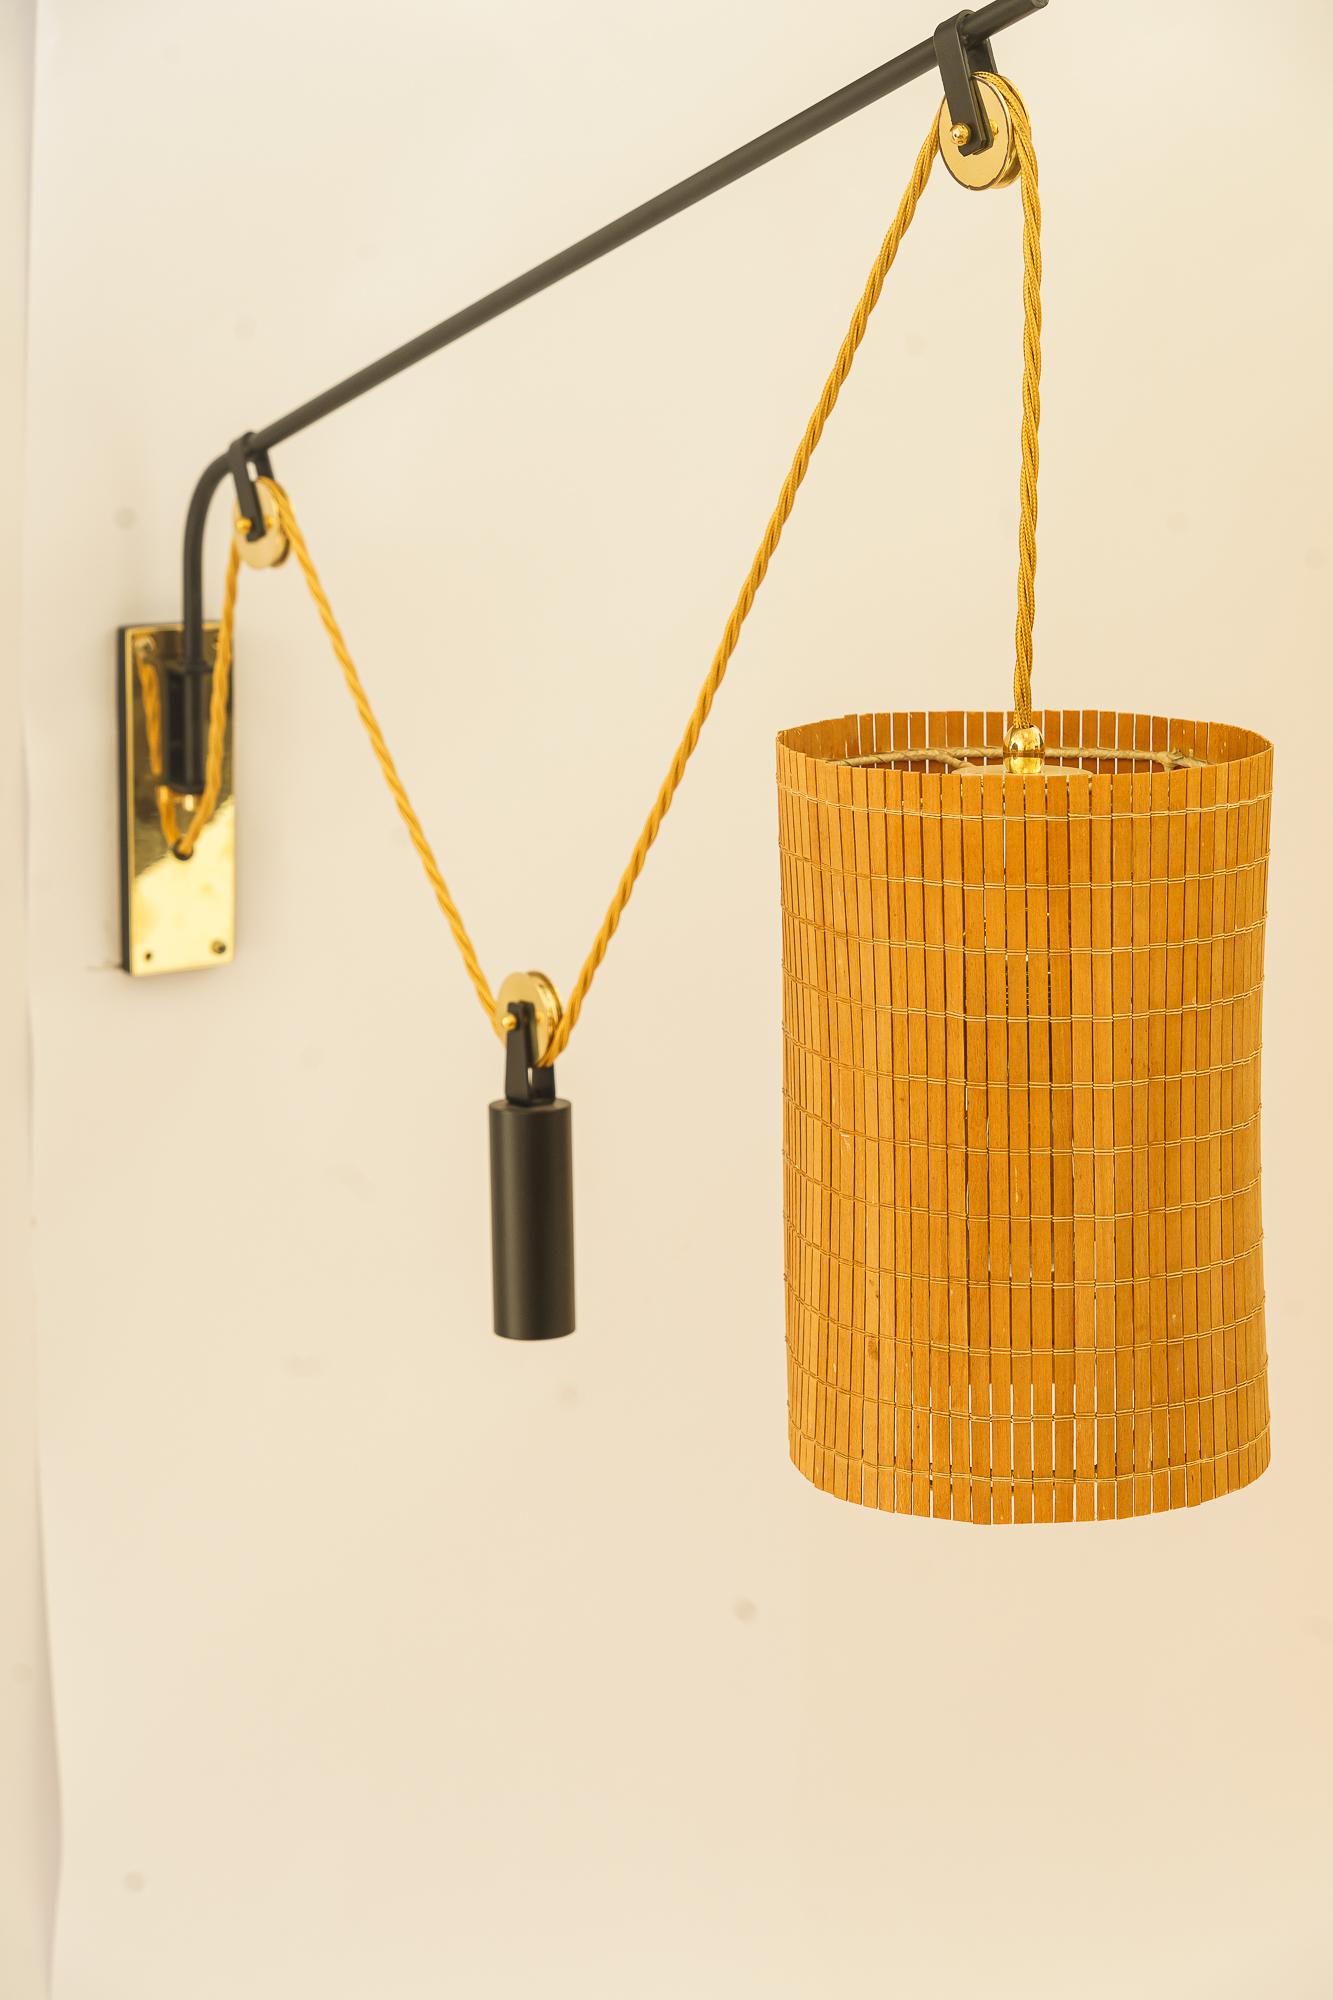 2 Rupert nikoll adjustable in hight with original wicker shades around 1950s For Sale 2